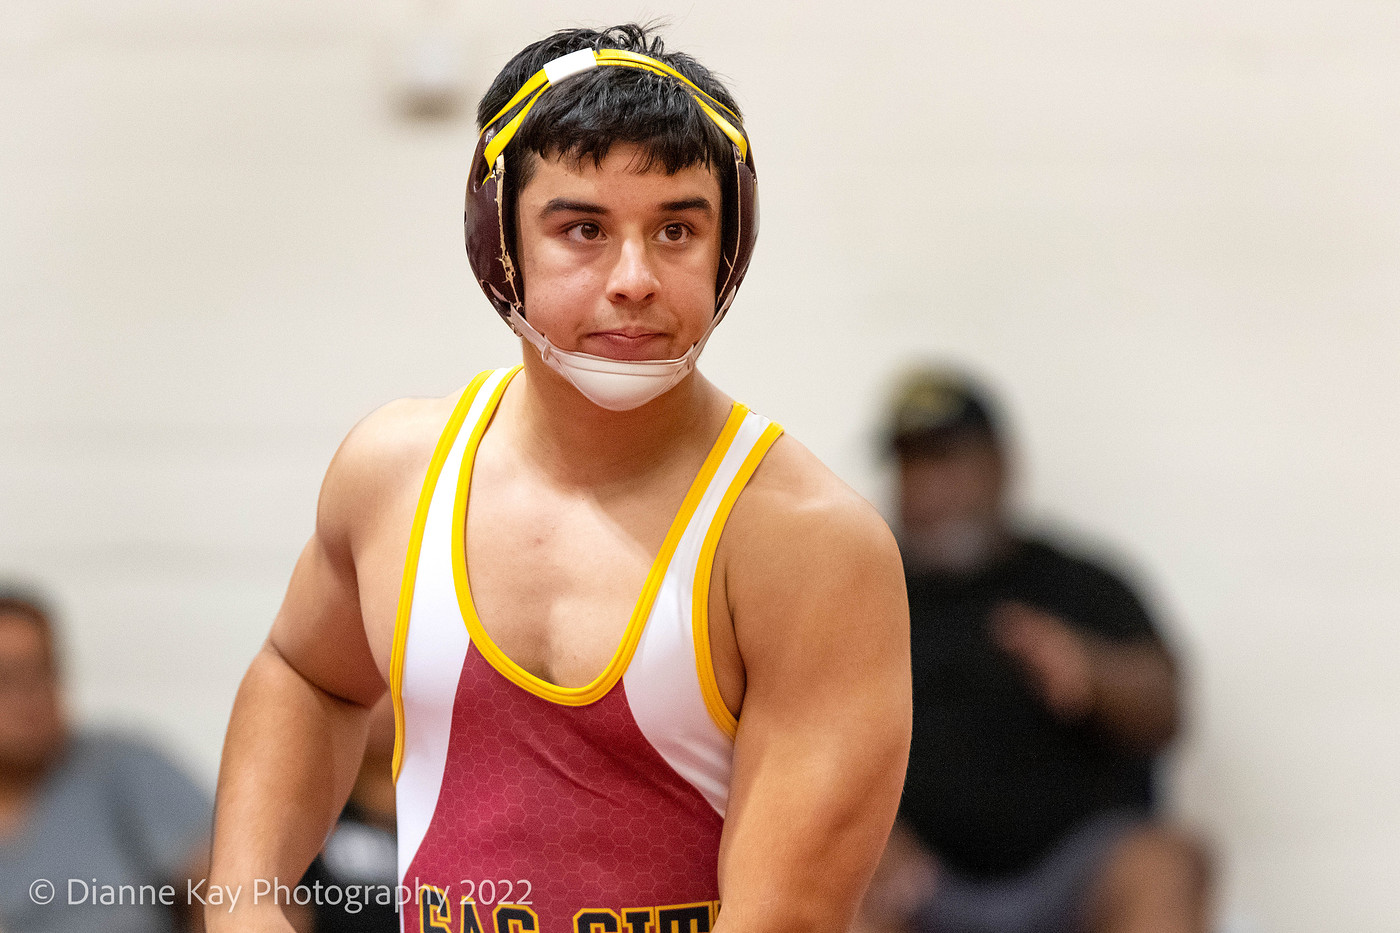 The Panthers have 13 wrestlers compete at the Menlo Open against some top 4-year Universities